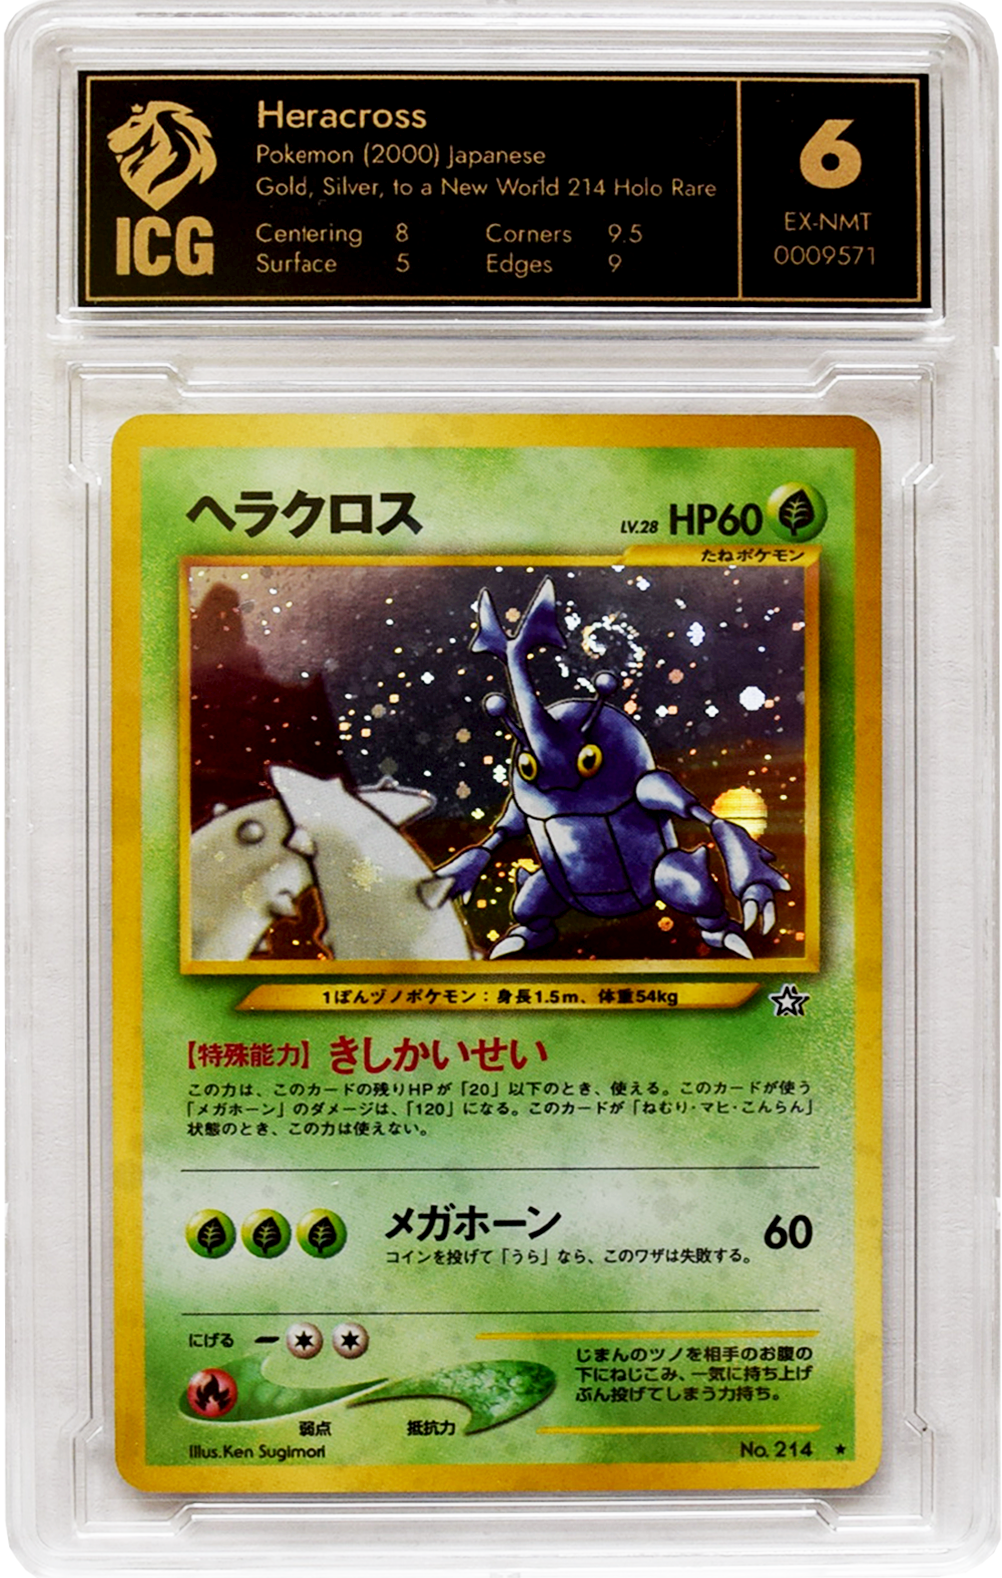 2000 Pokemon Gold, Silver, to a New World - Heracross (#214) - Holo - ICG 6 EX-NMT